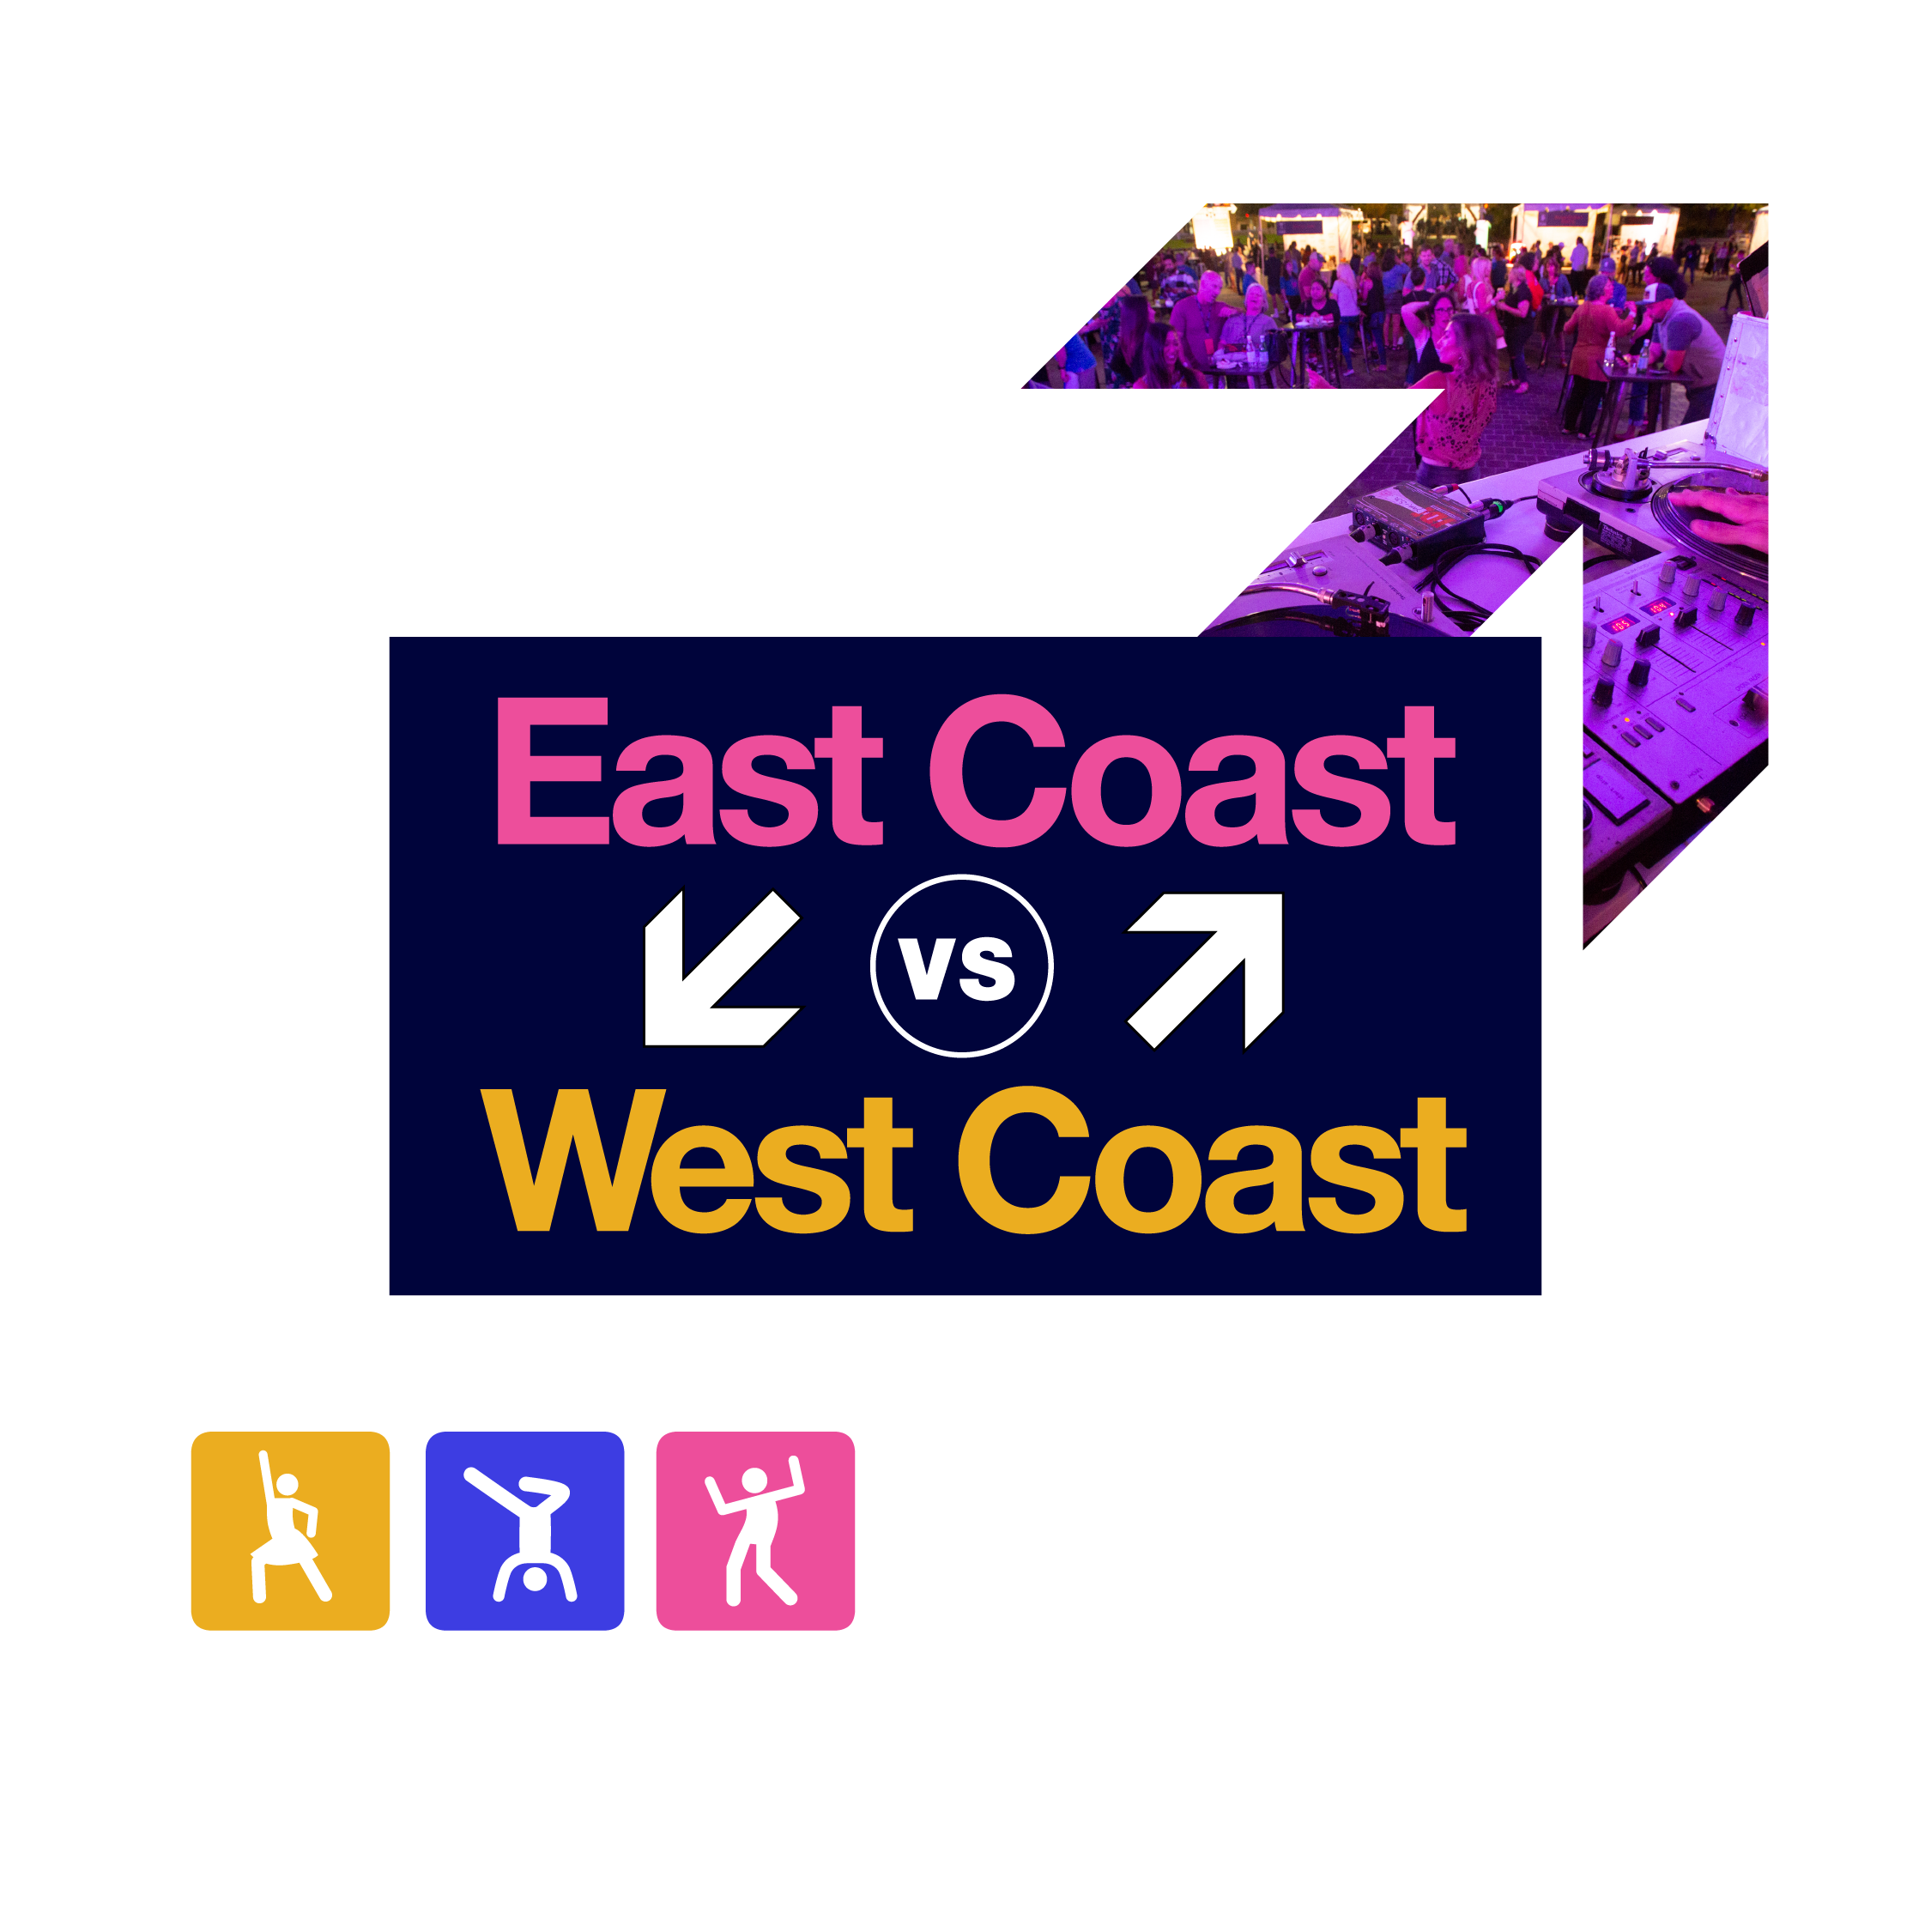 Feast East Coast vs West Coast Event ID written out with arrows. Includes illustrations people three people dancing